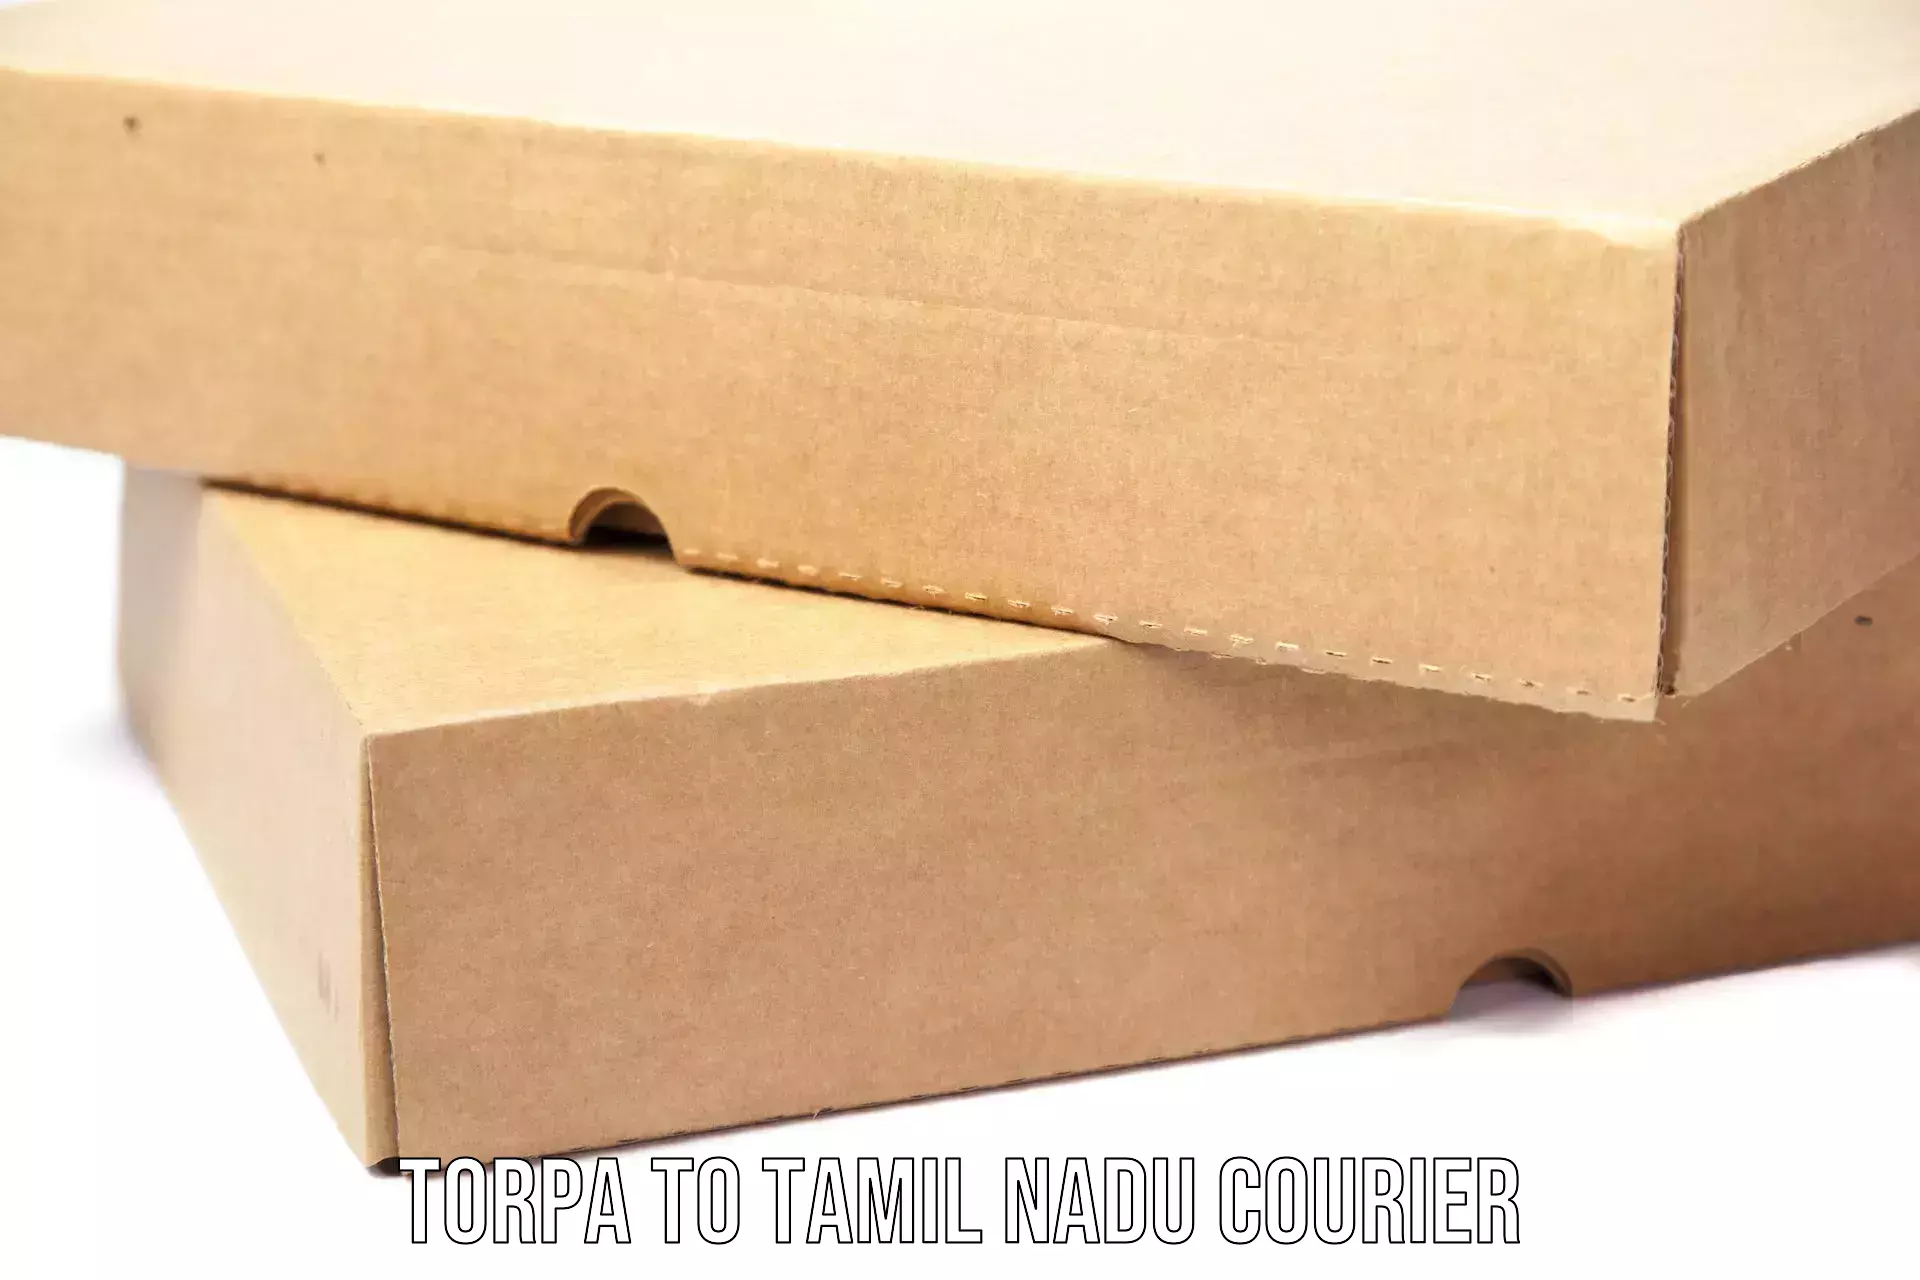 Courier service booking Torpa to Tamil Nadu